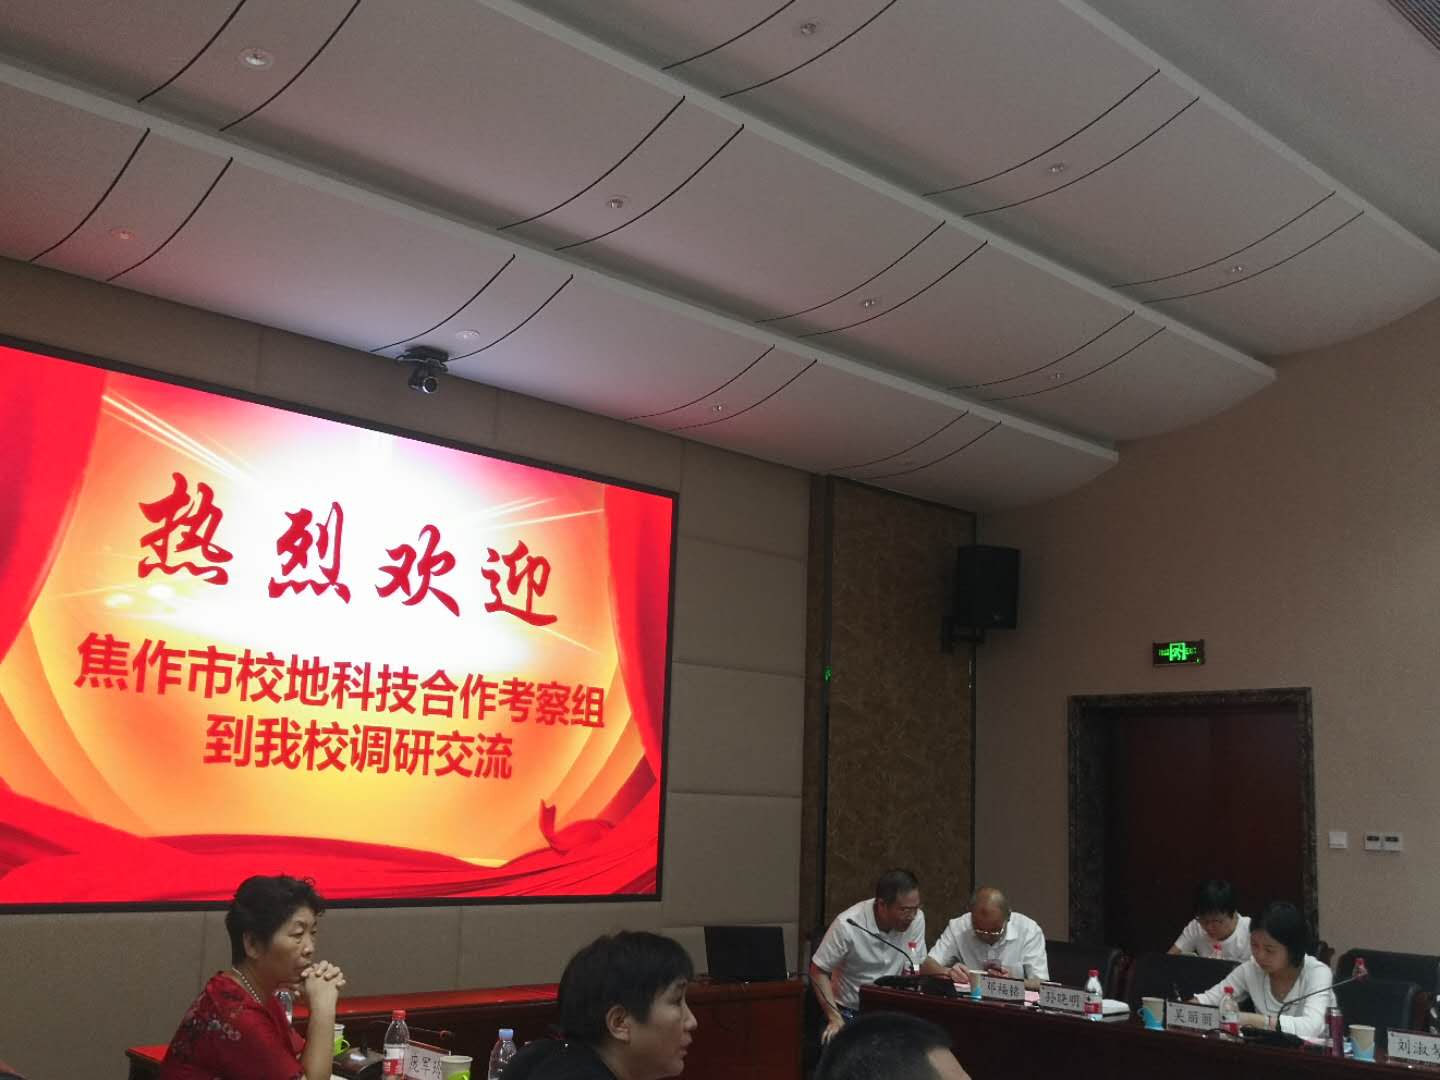 China University of Mining and Technology (Beijing) and Jiaozuo Enterprise Science and Technology Investigation and Research Cooperation Exchange Meeting